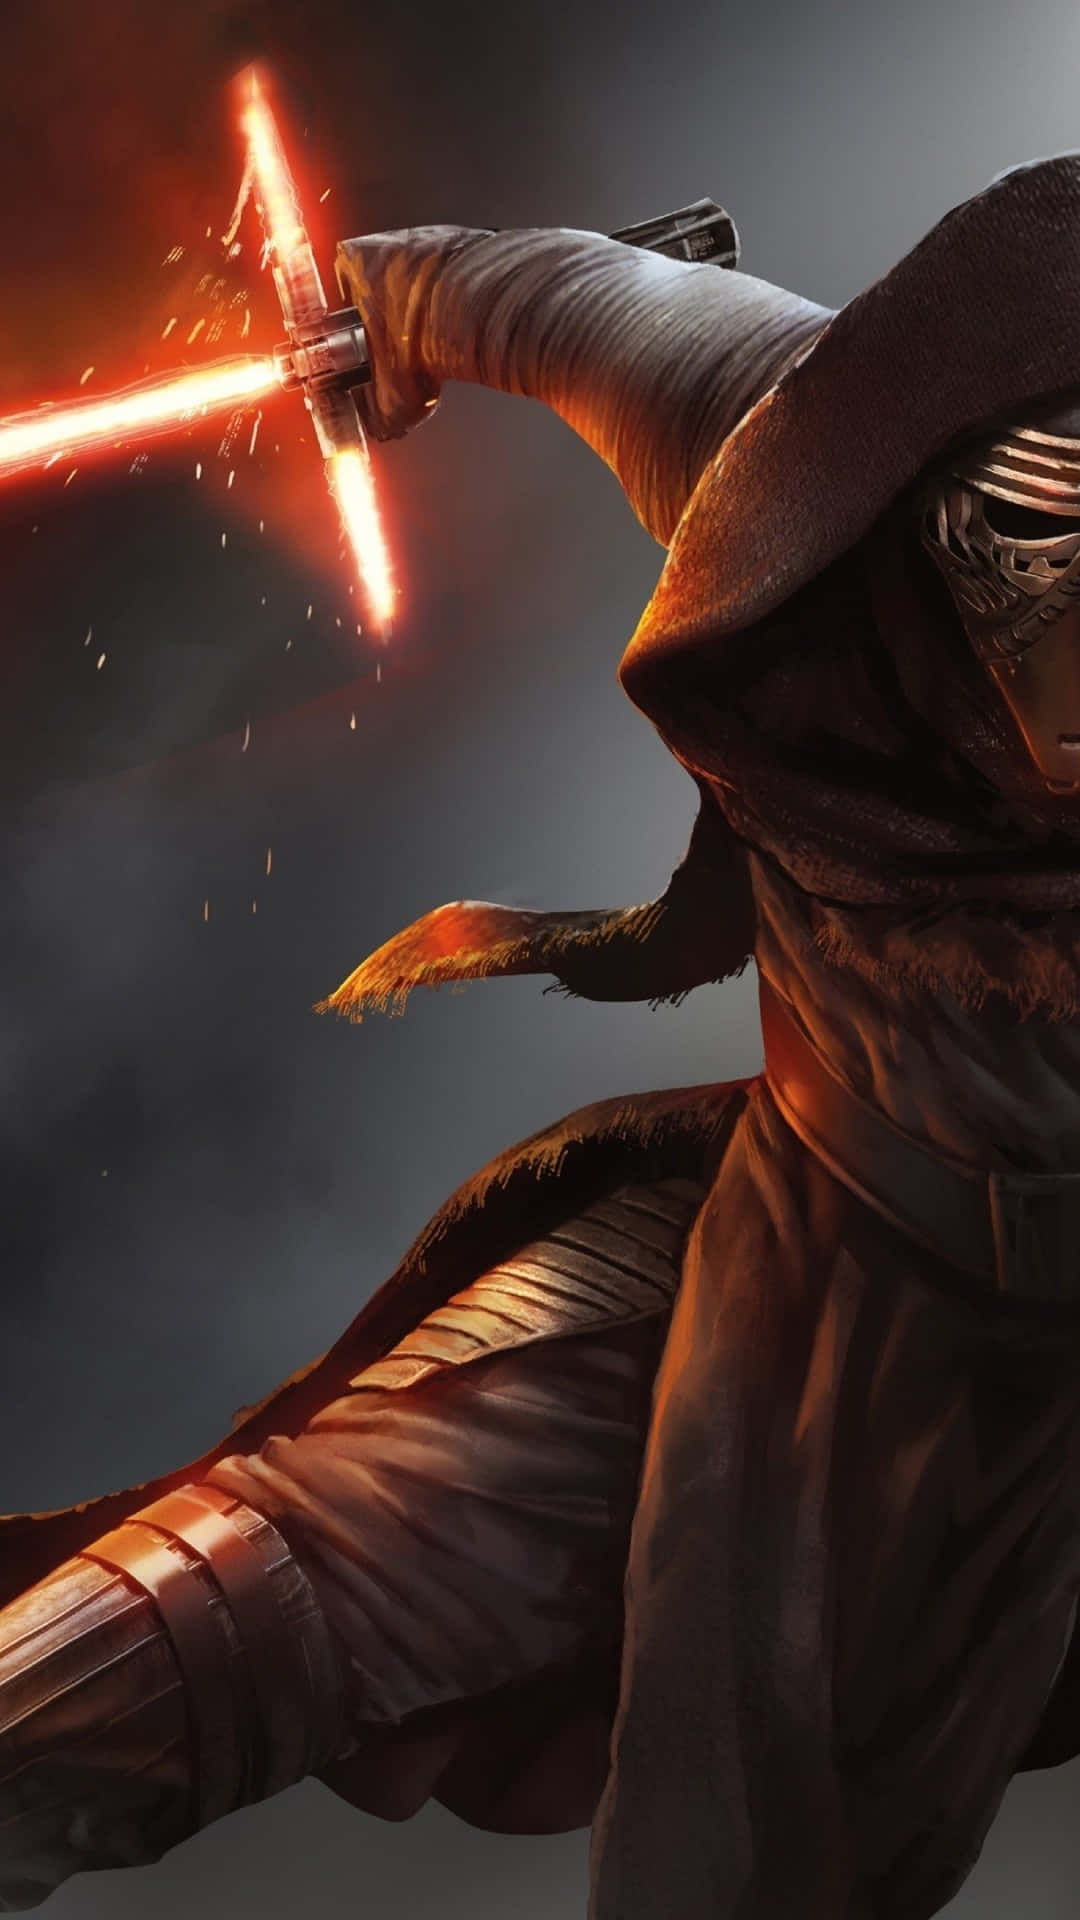 "Be your own ruler of the galaxy with Kylo Ren iPhone wallpaper" Wallpaper